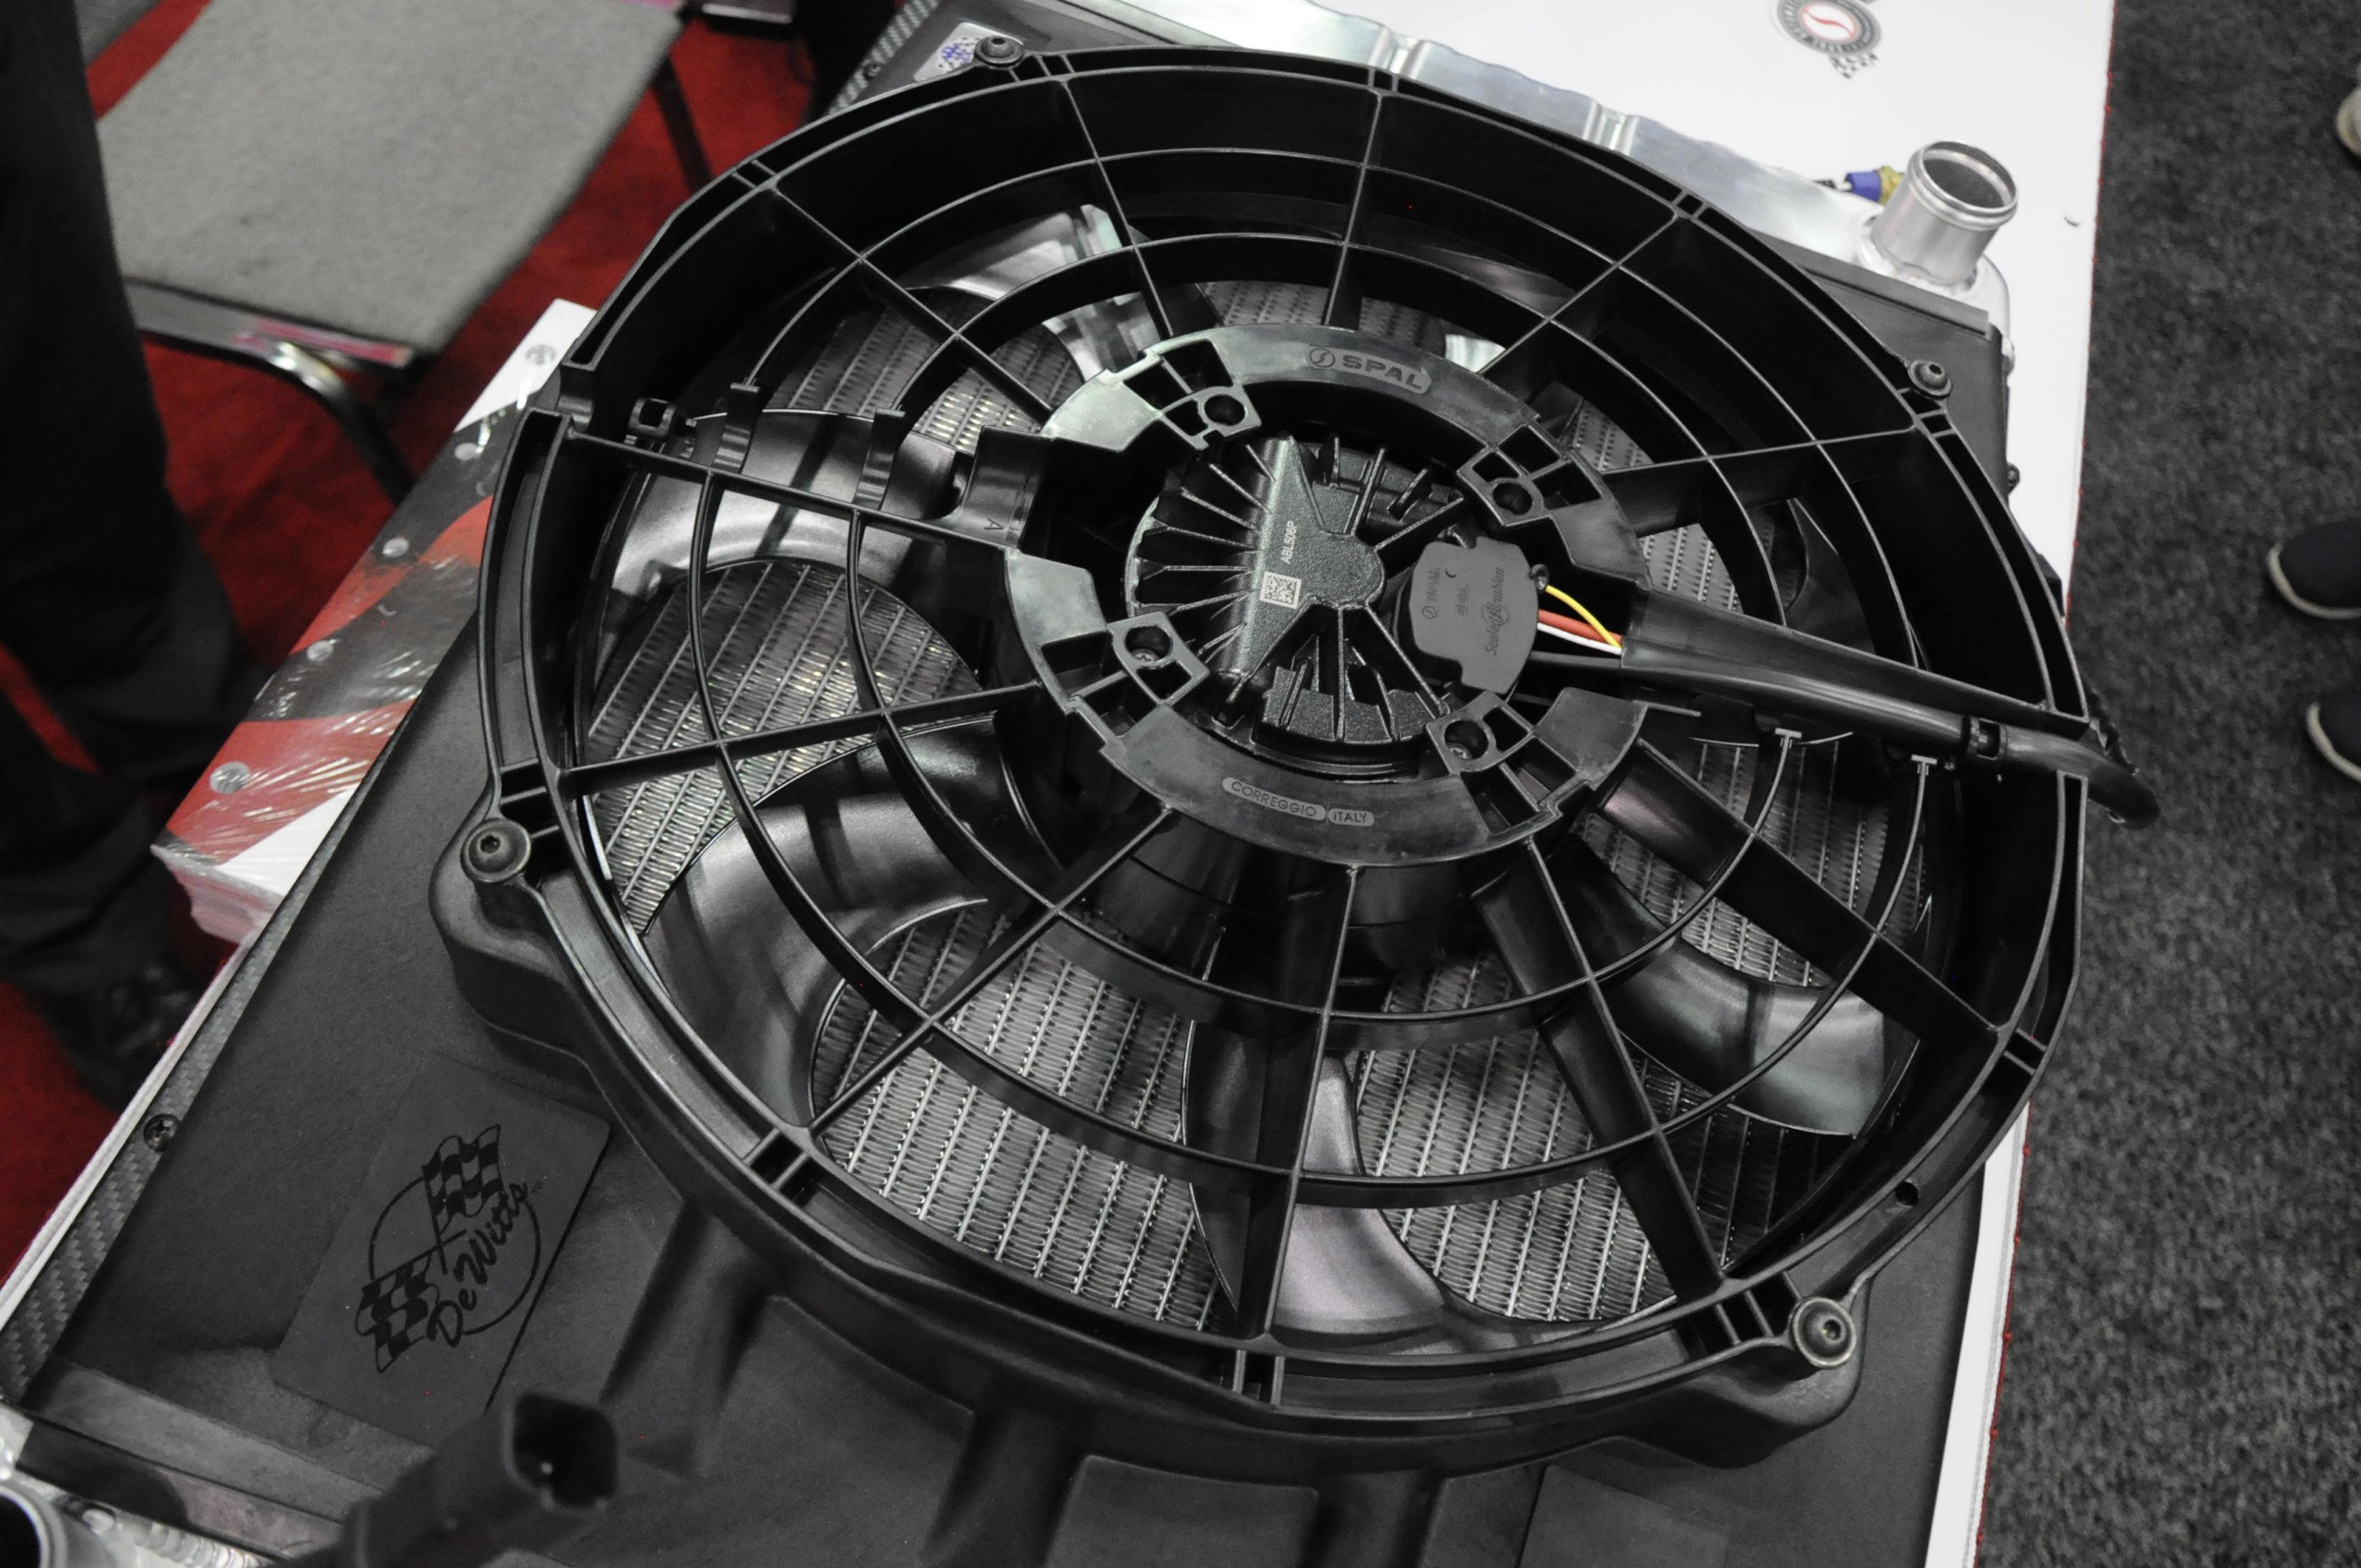 Brushless electric cooling fan